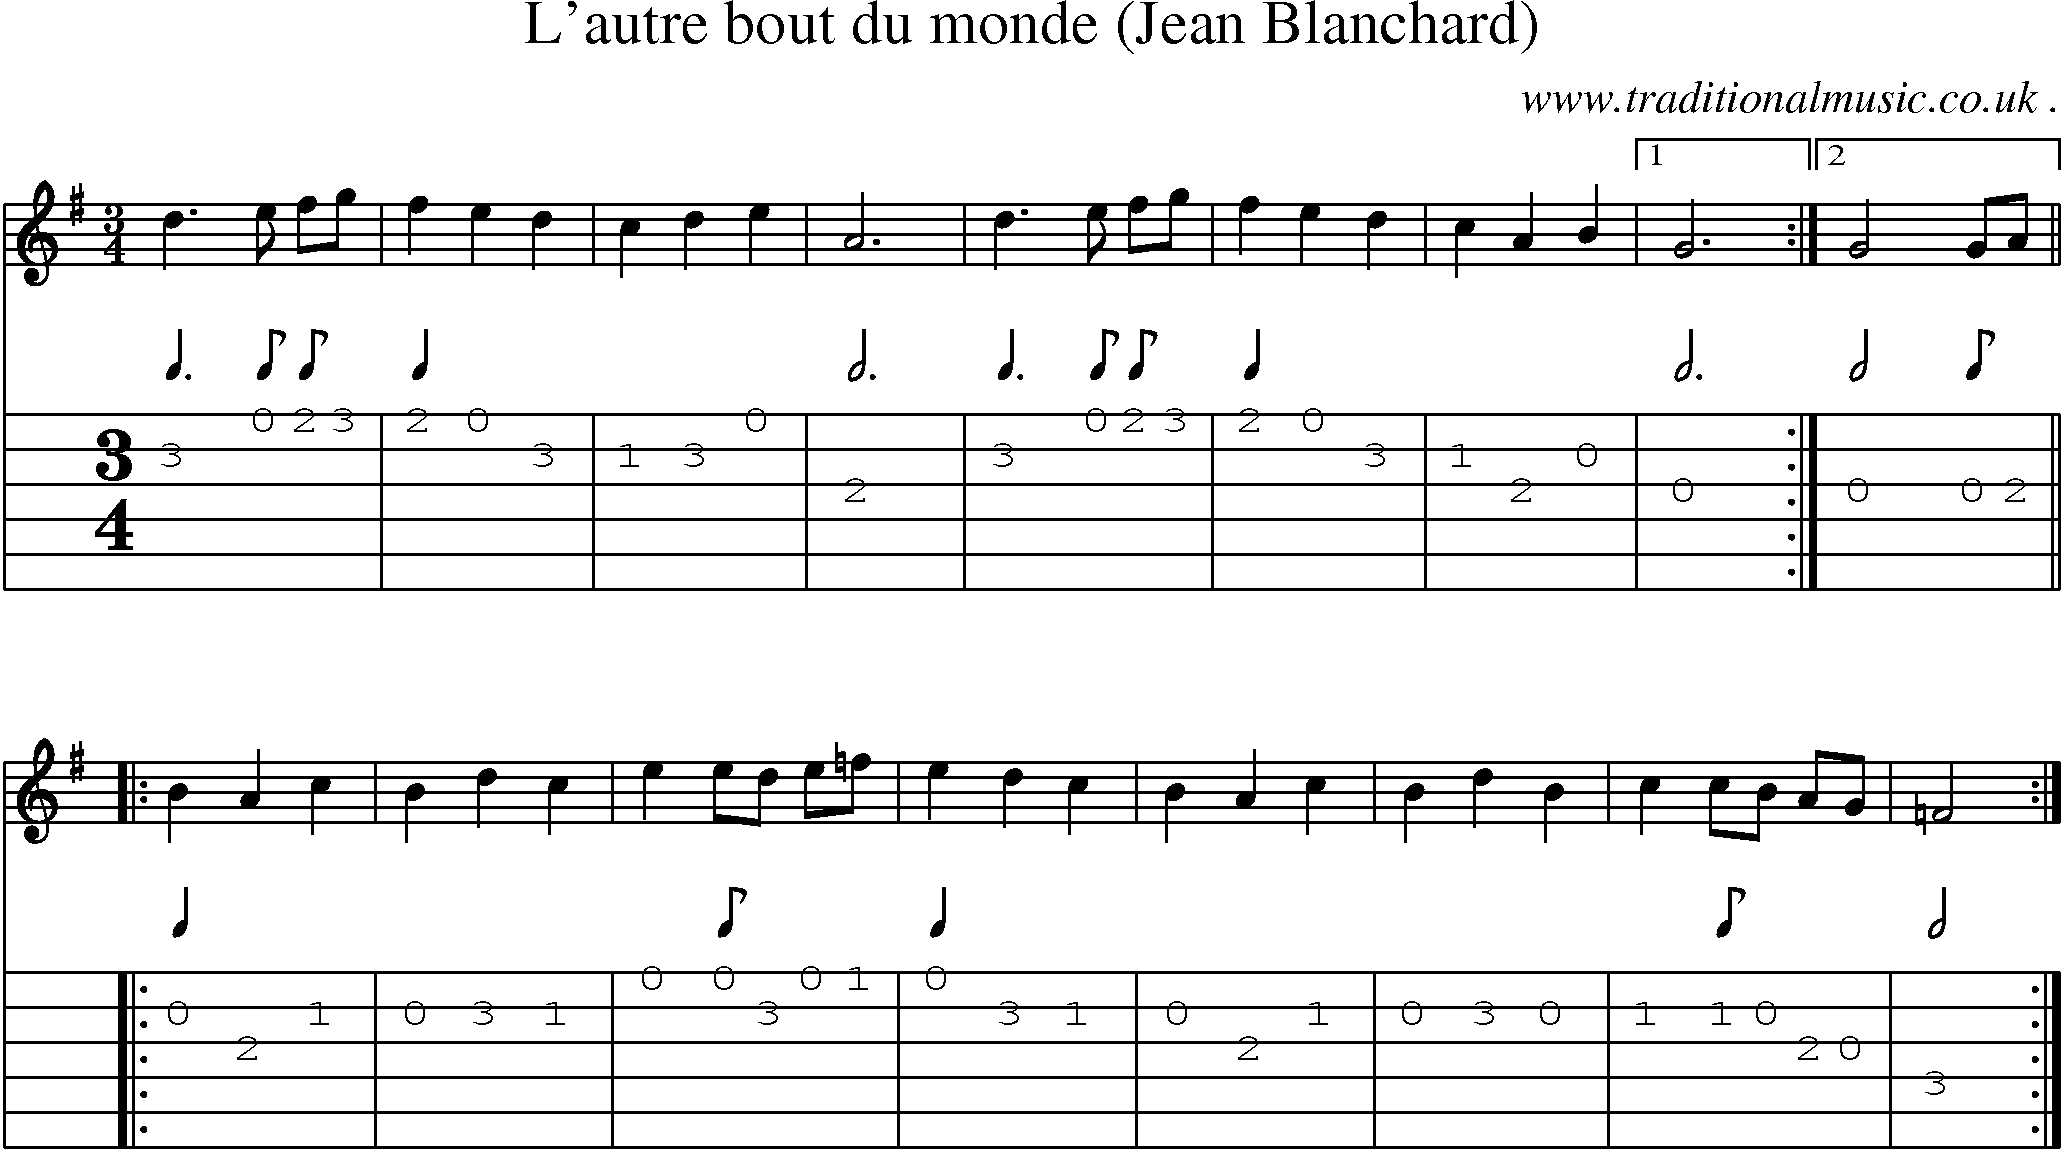 Sheet-Music and Guitar Tabs for Lautre Bout Du Monde (jean Blanchard)